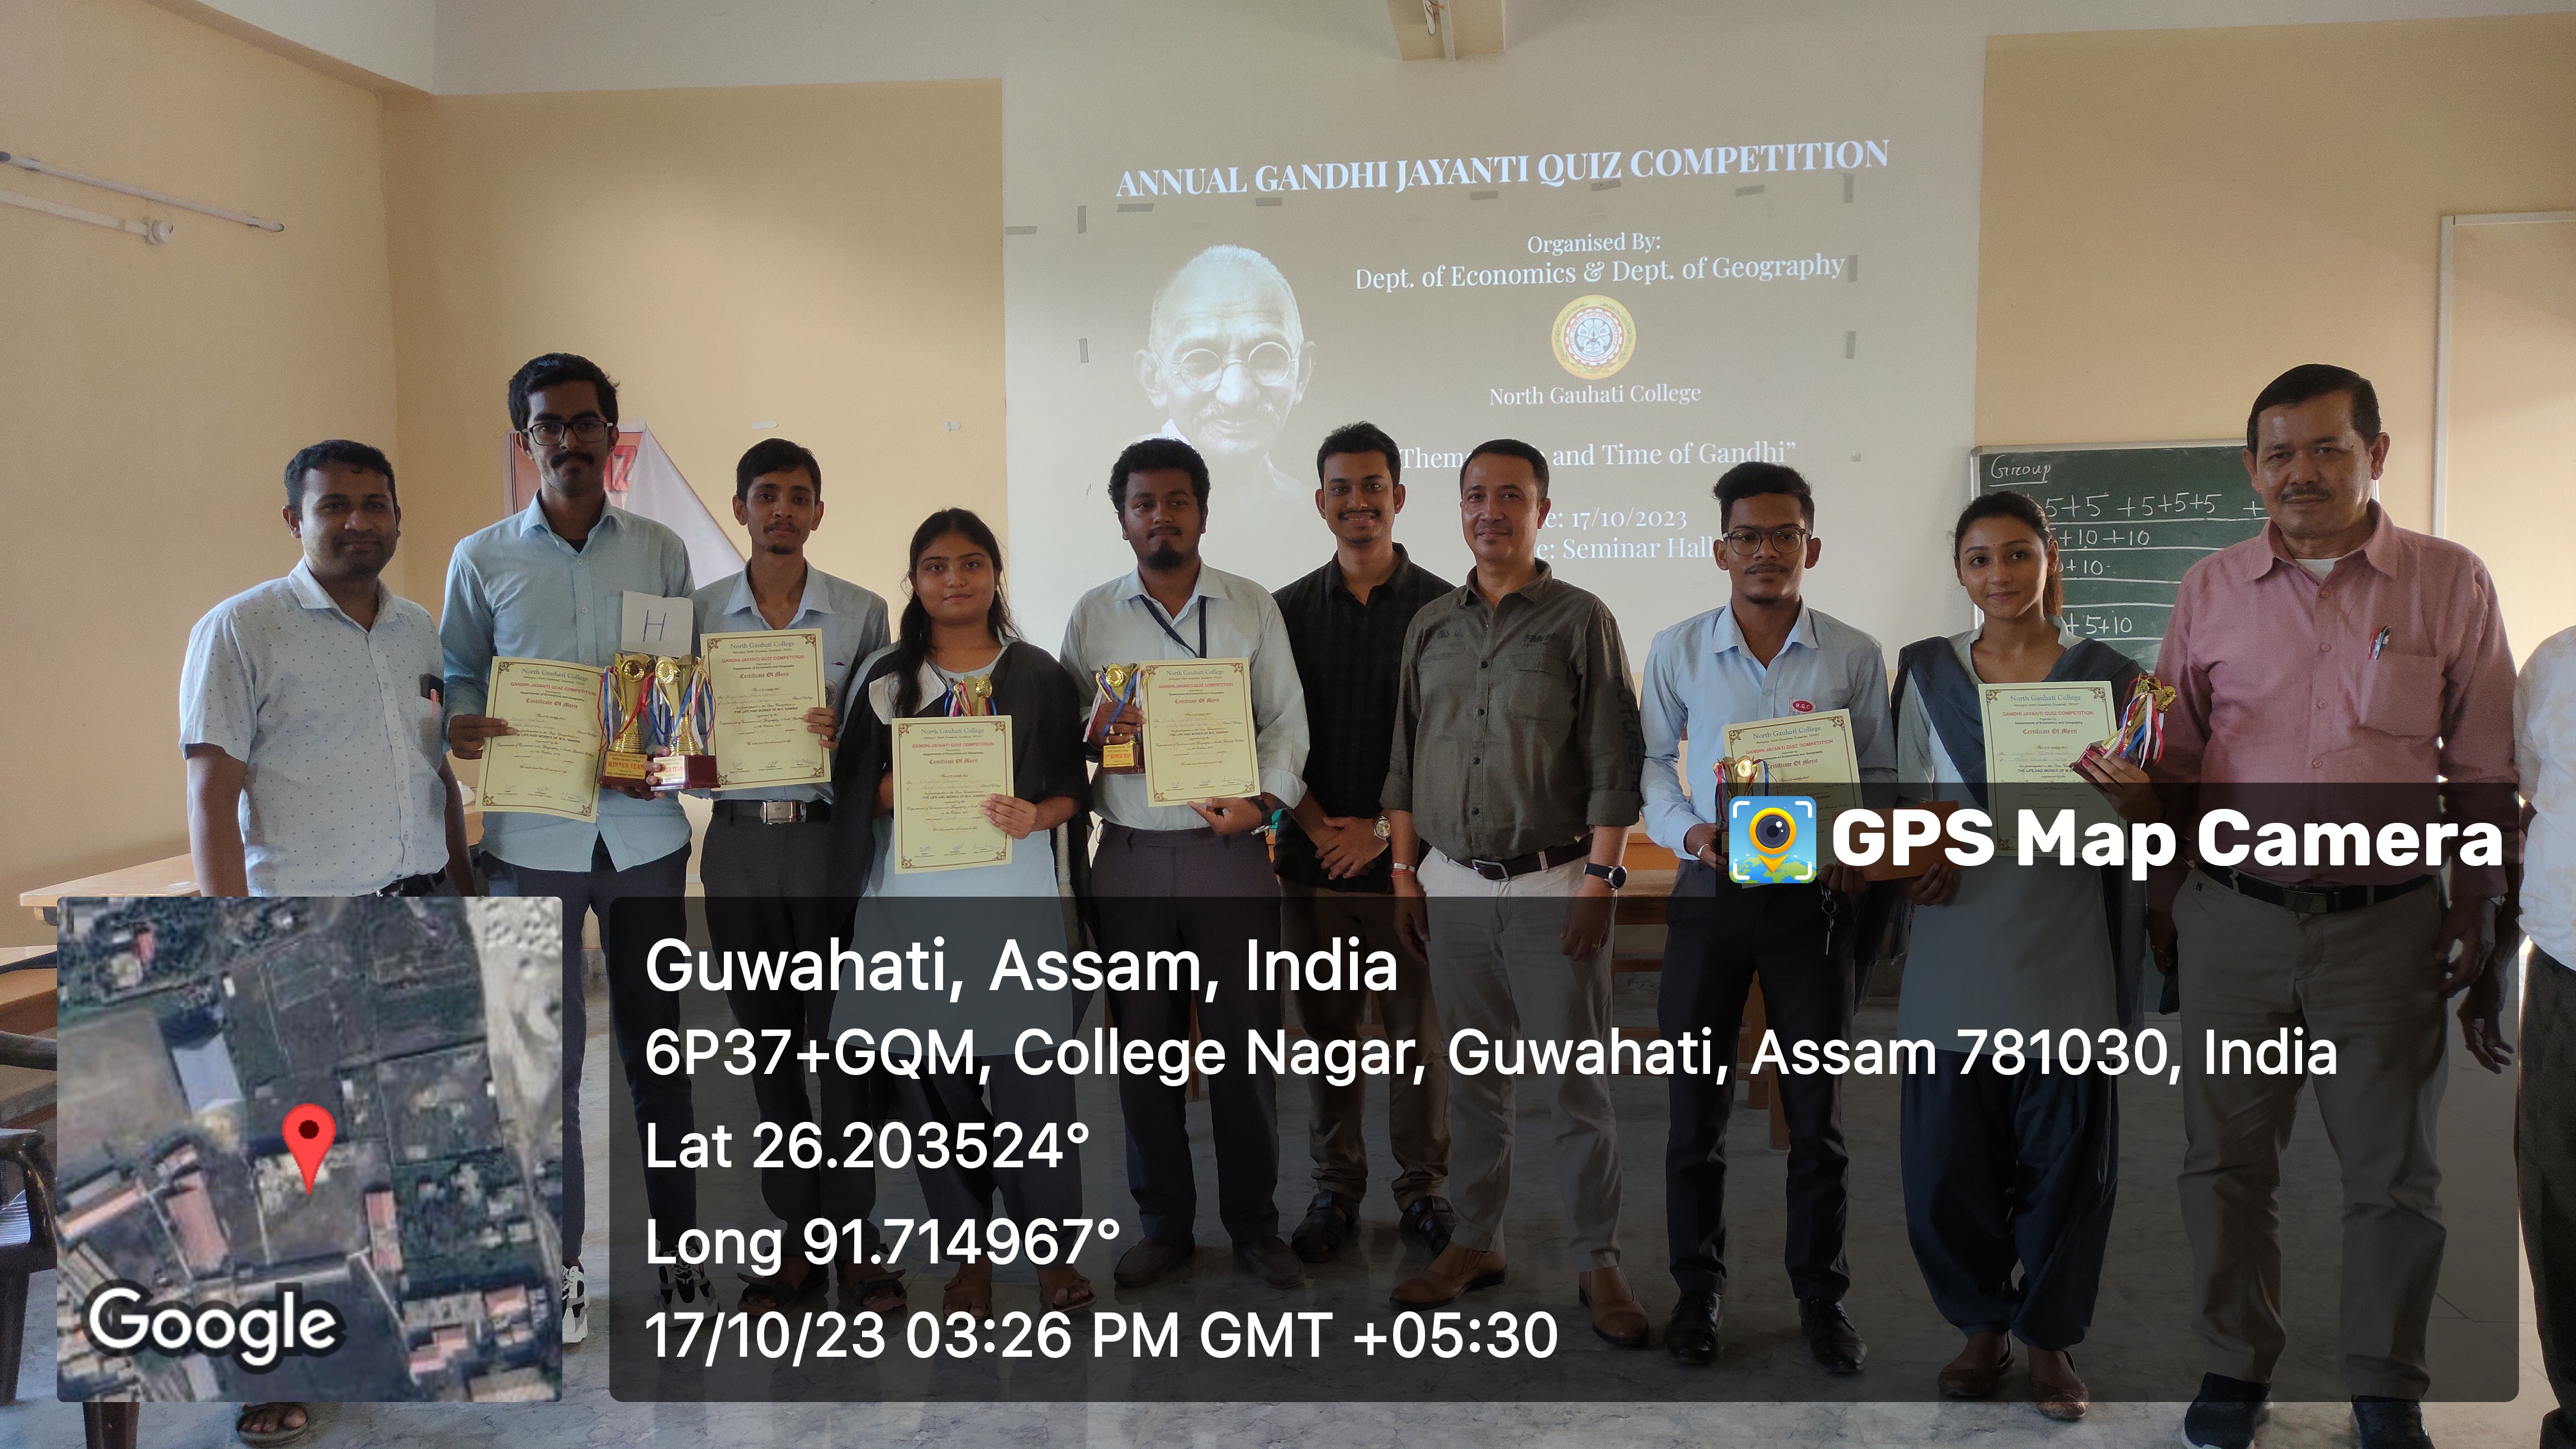 Annual Gandhi Jayanti Quiz Competition organised by Dpt. of Economics and Dpt. of Geography on 17.10.2023